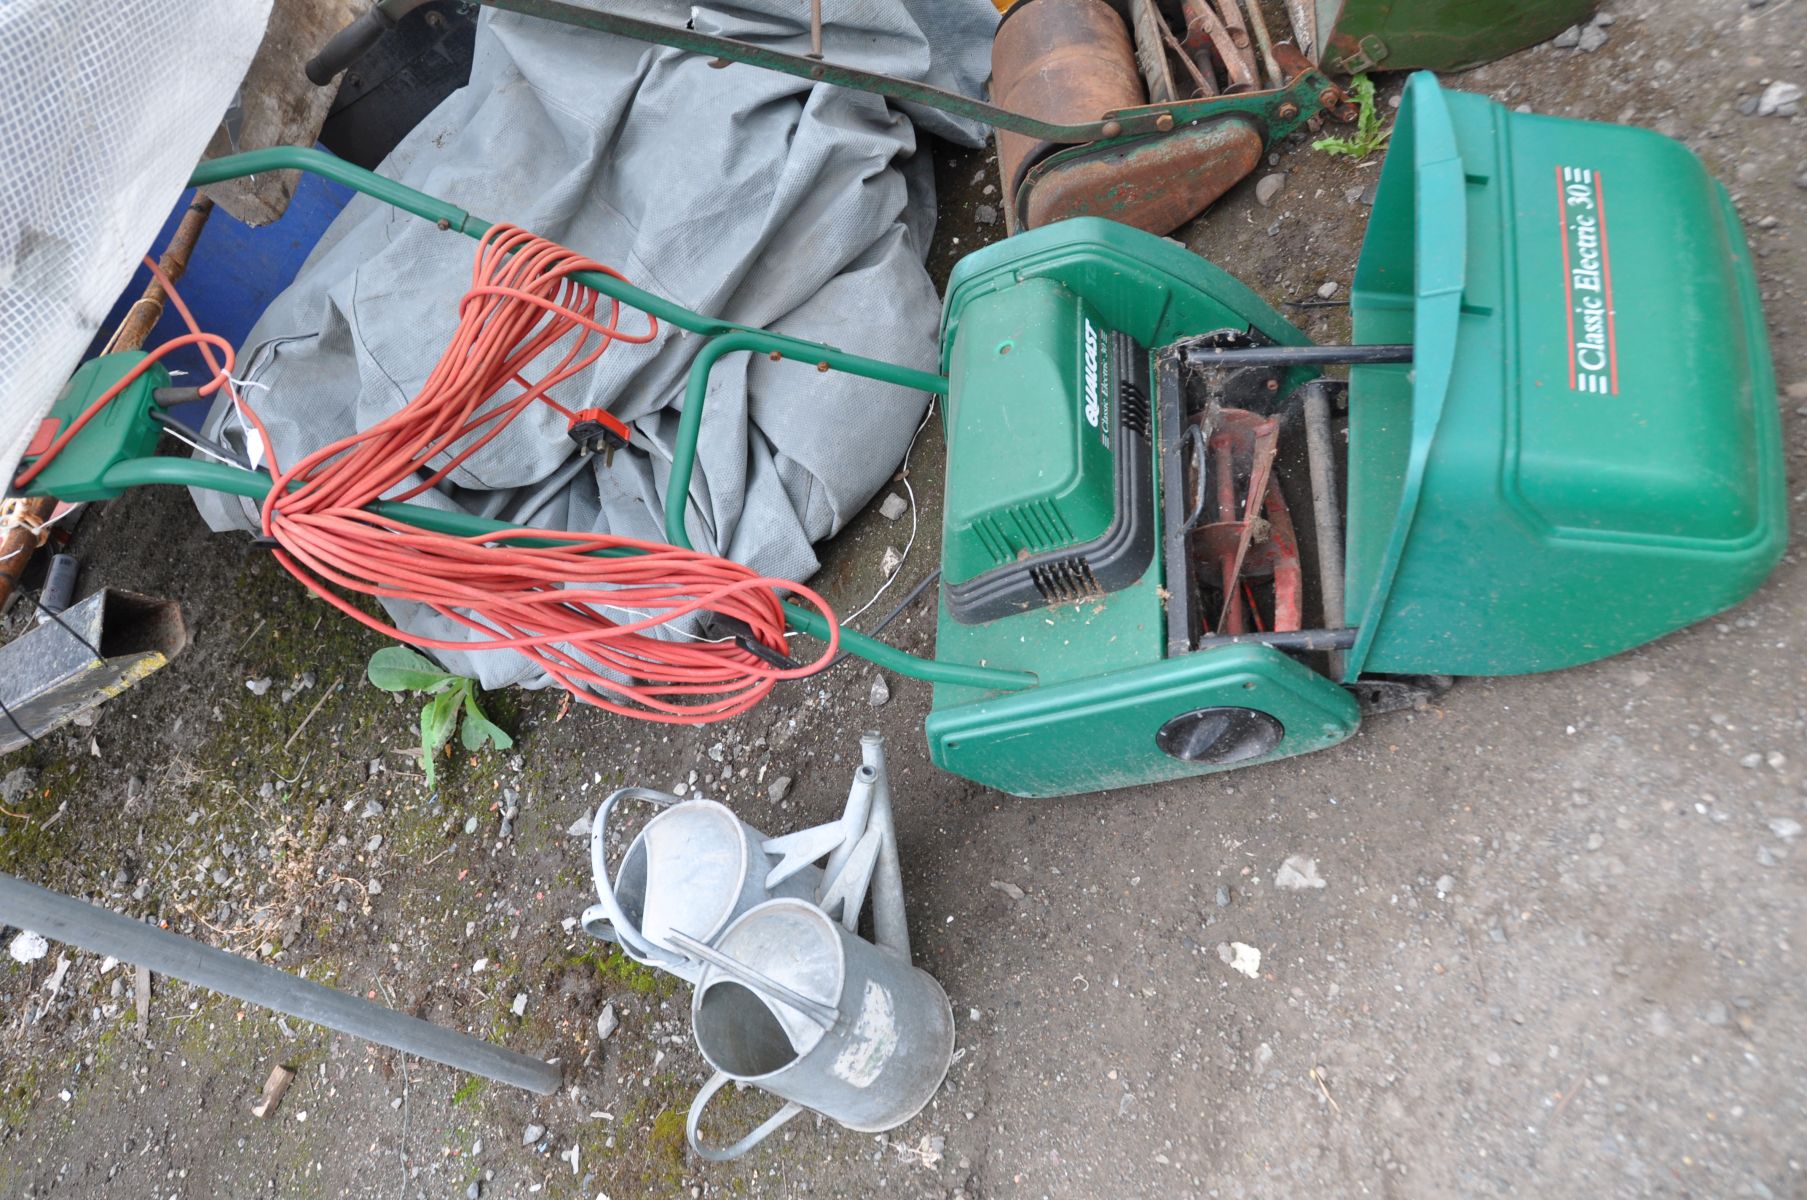 A QUALCAST CLASSIC ELECTRIC 30 CYLINDER LAWN MOWER with grass box (PAT pass and working) and a - Image 2 of 3